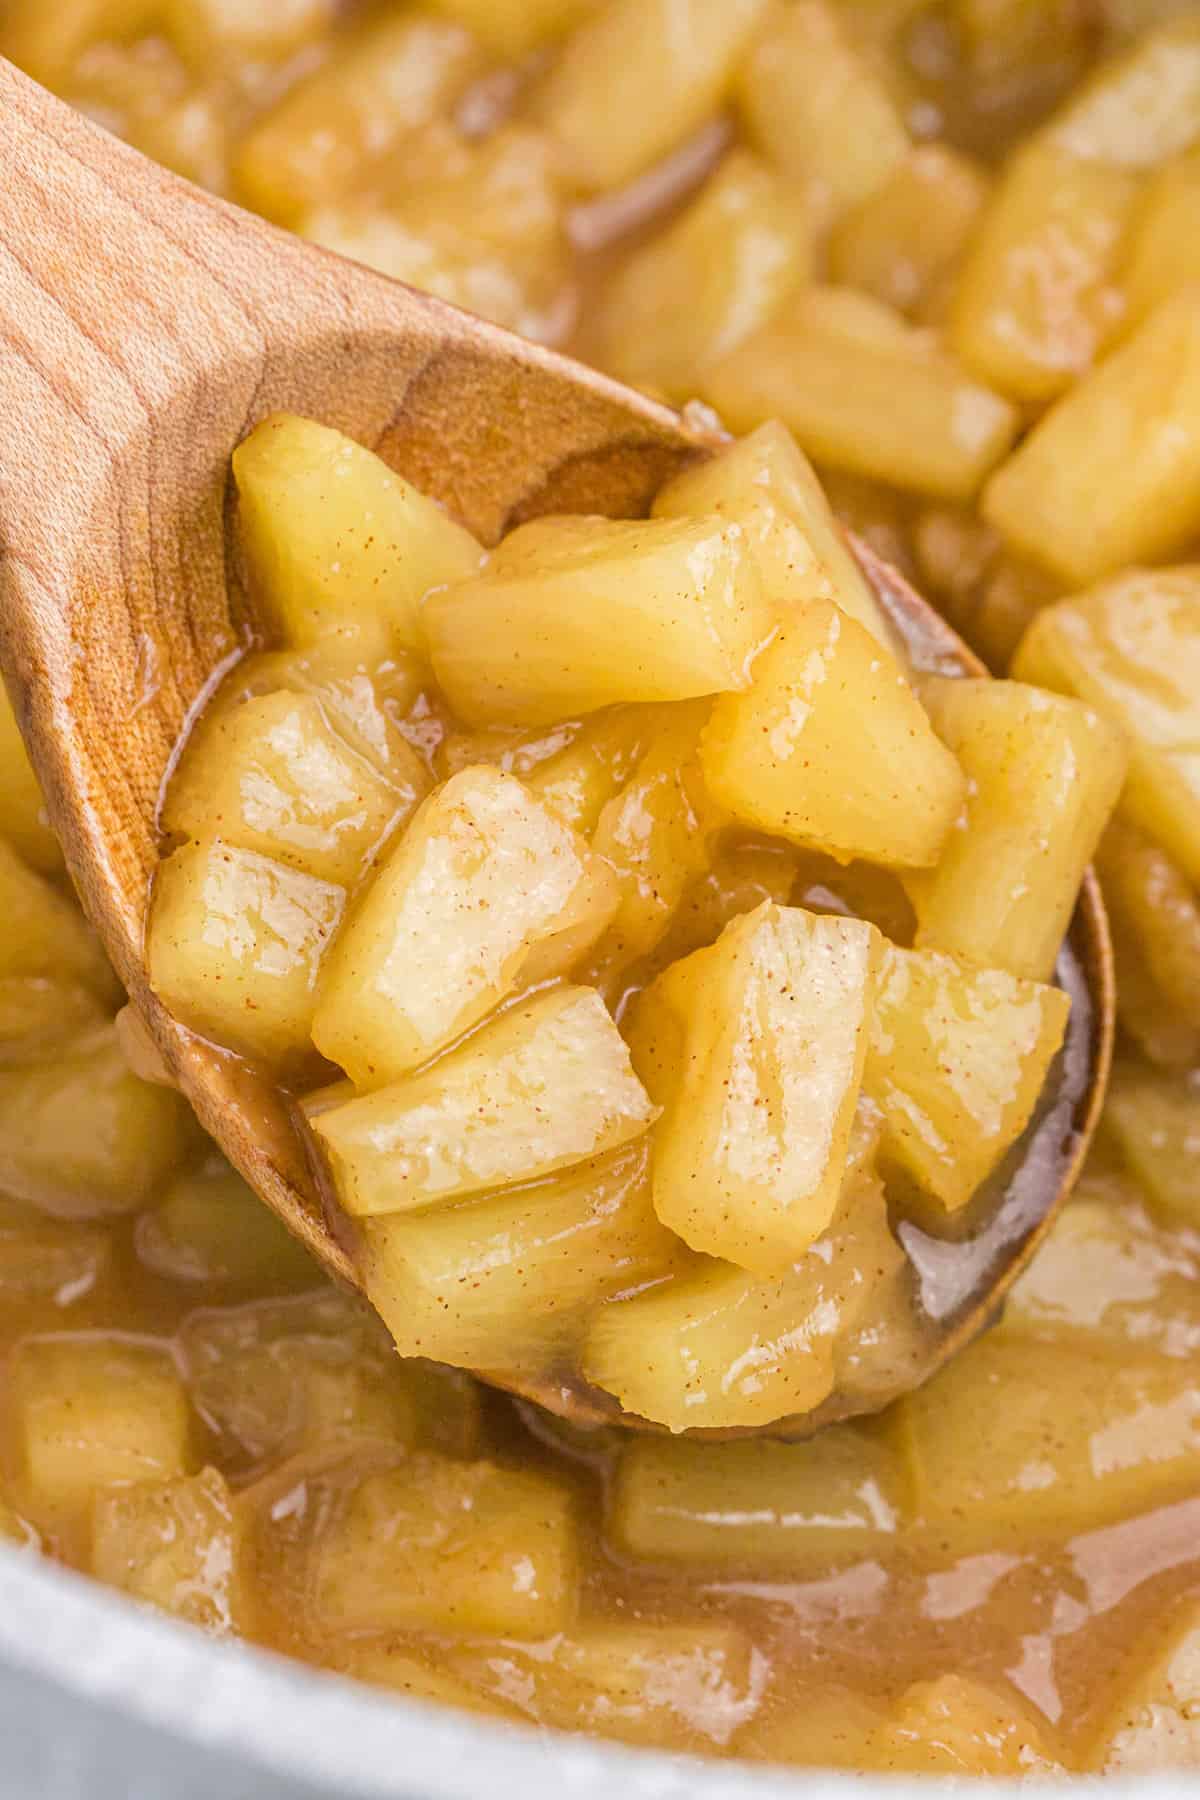 Caramelized pineapple on wooden spoon.